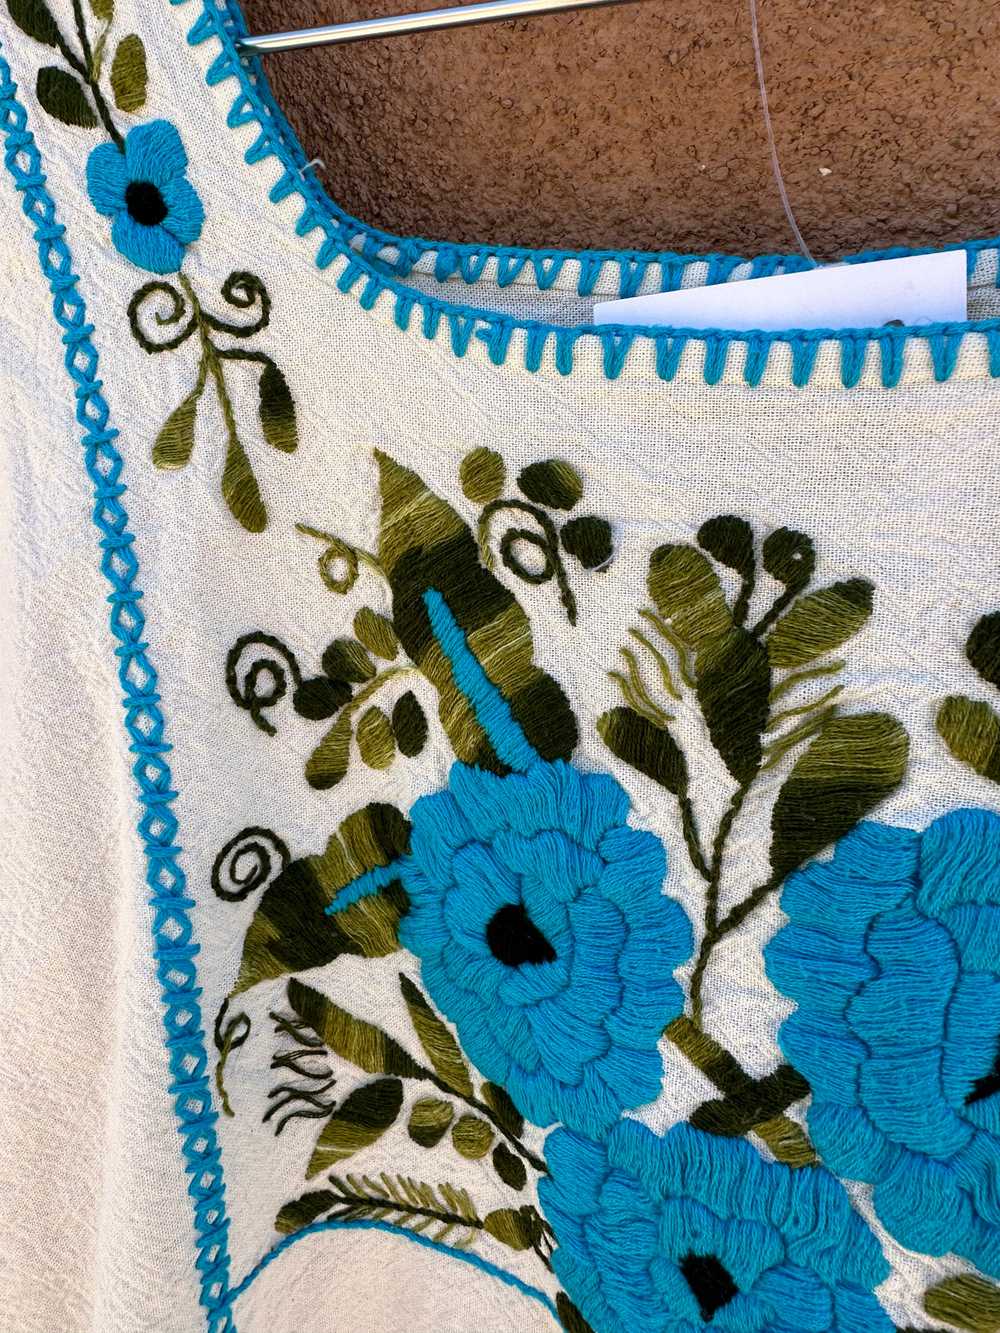 Mexican Embroidered Cotton Puebla Blouse, Cream a… - image 2